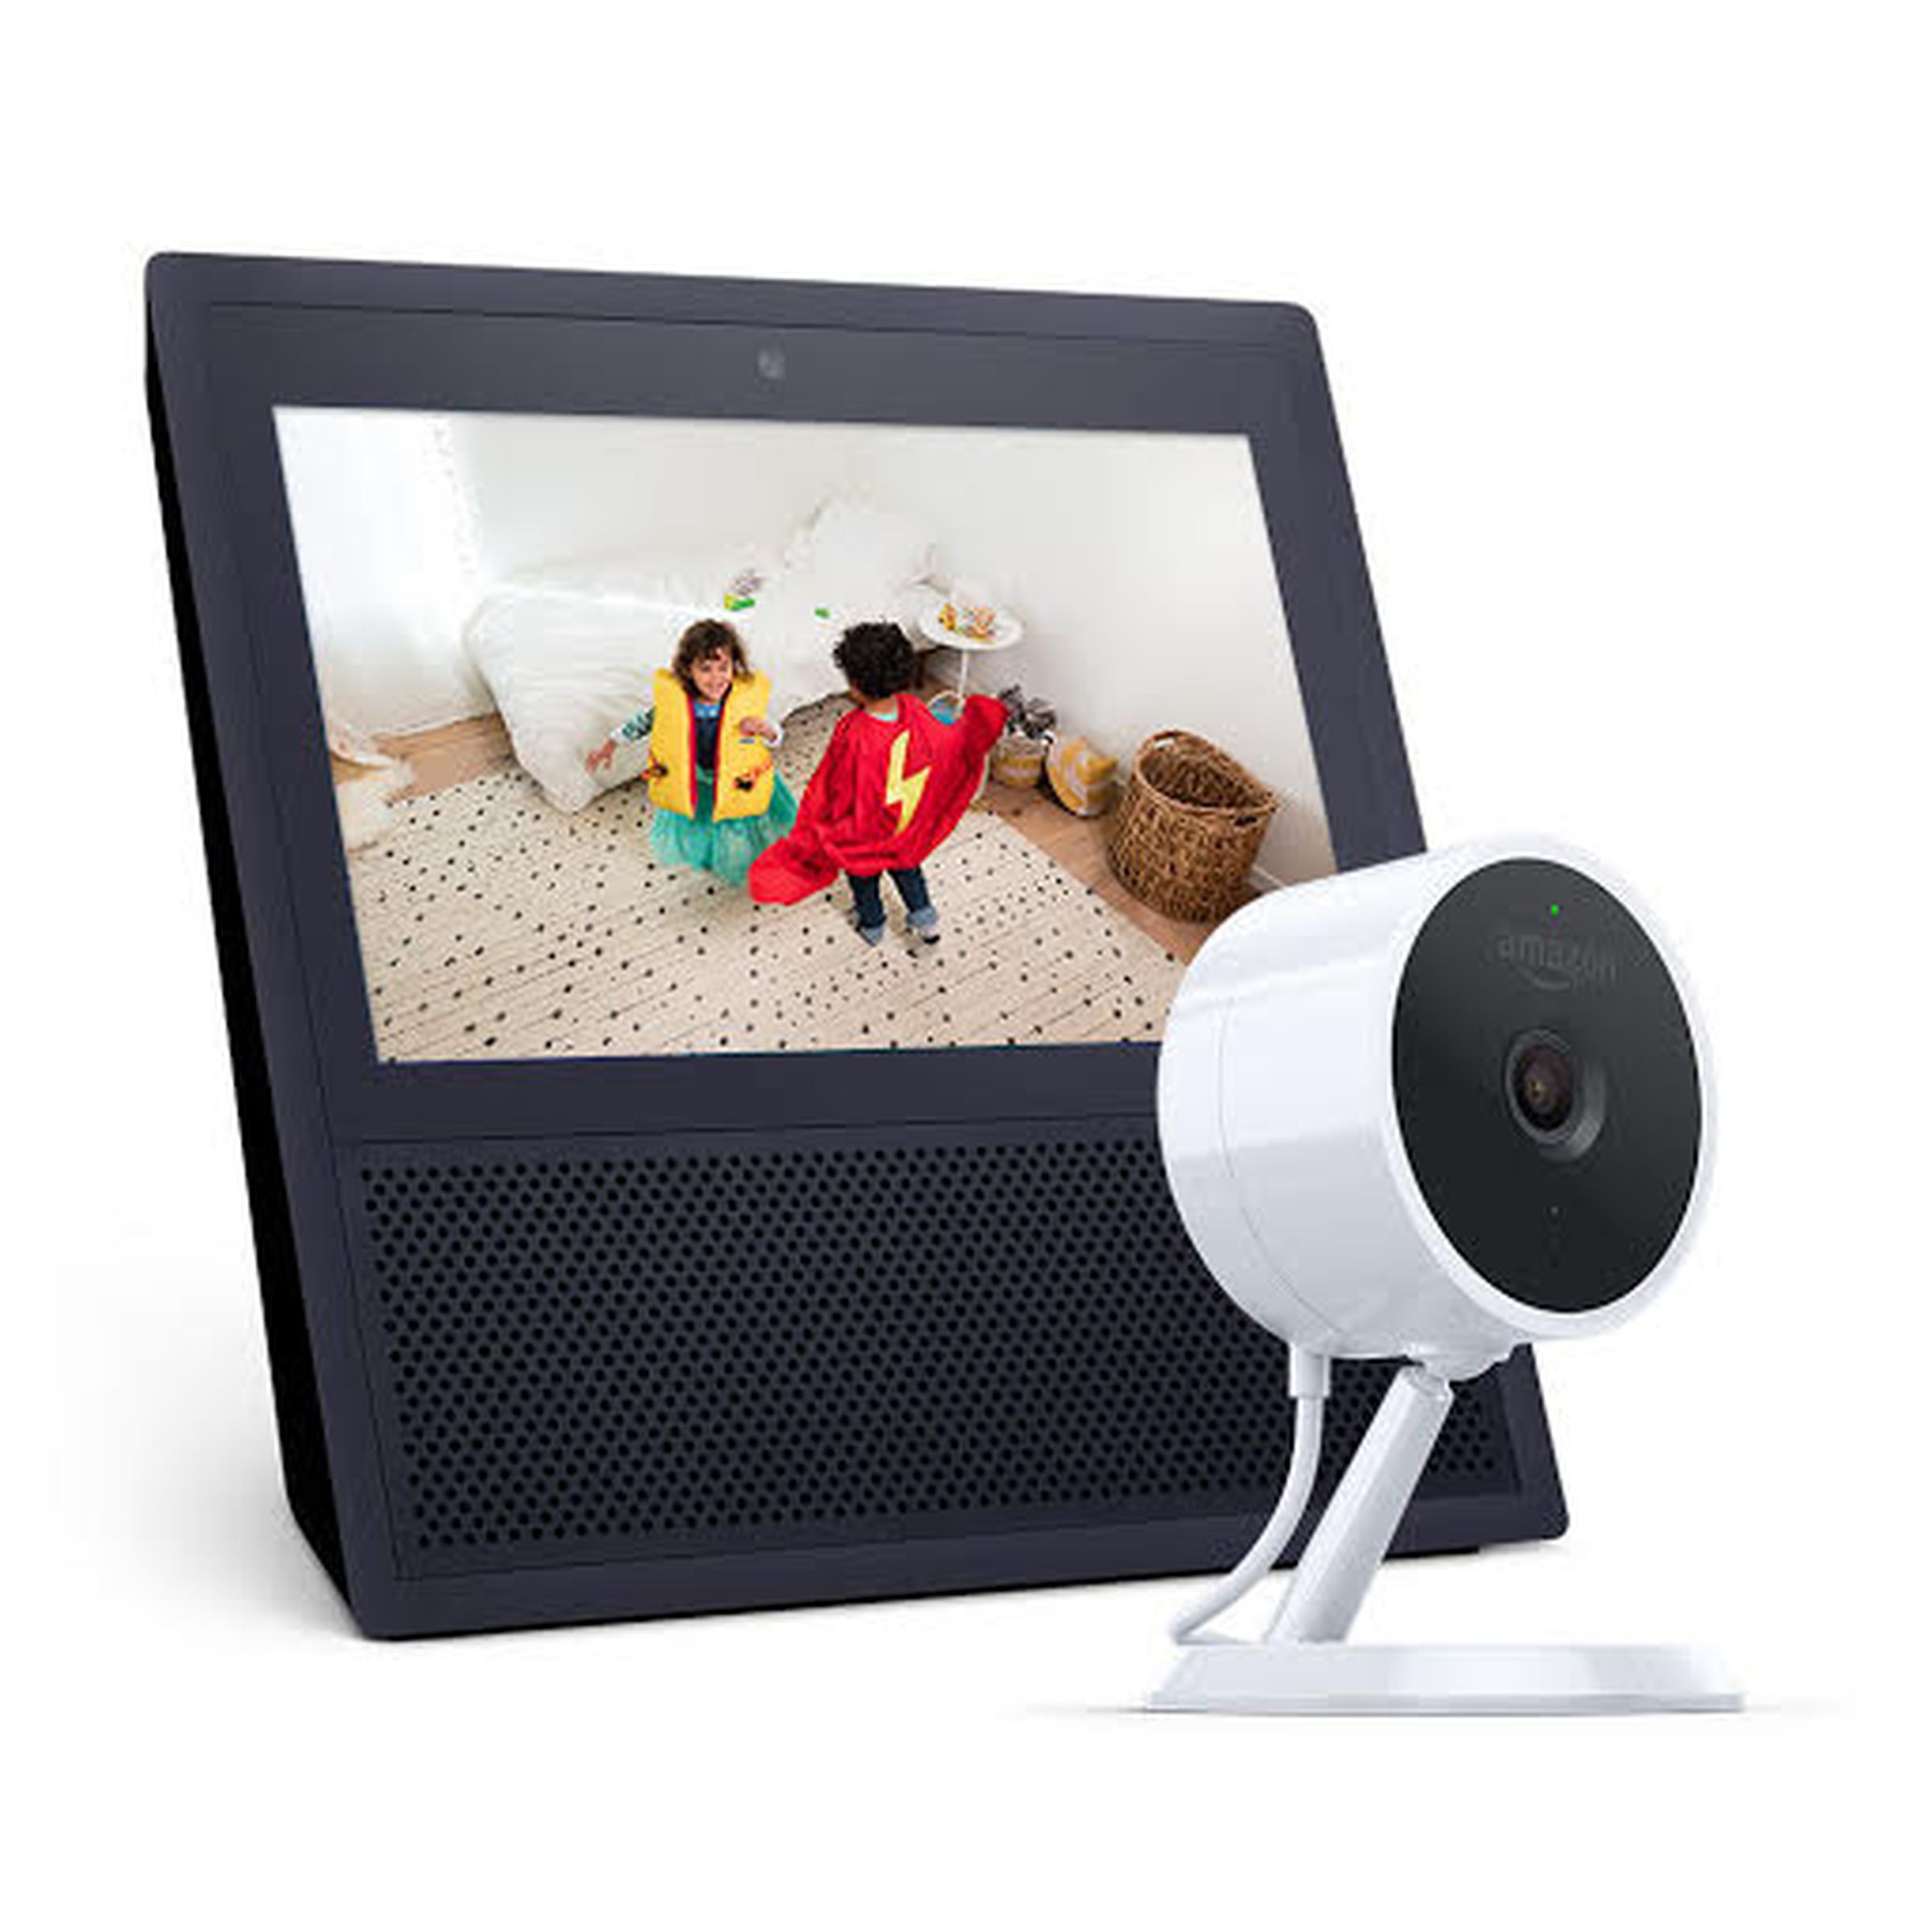 Cloud Cam streaming on an Echo Show